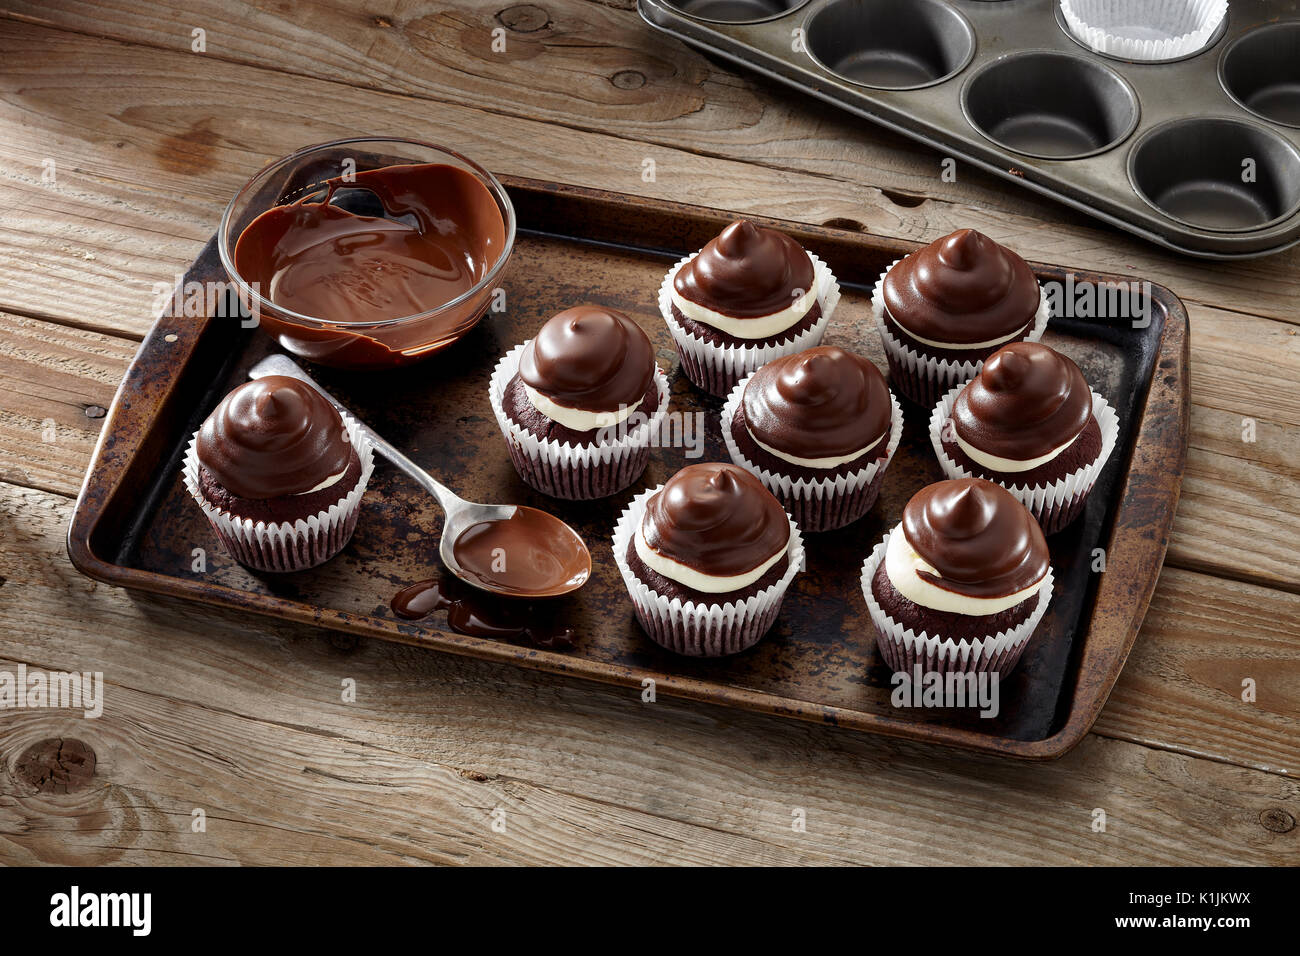 Peppermint Patty cupcakes Banque D'Images